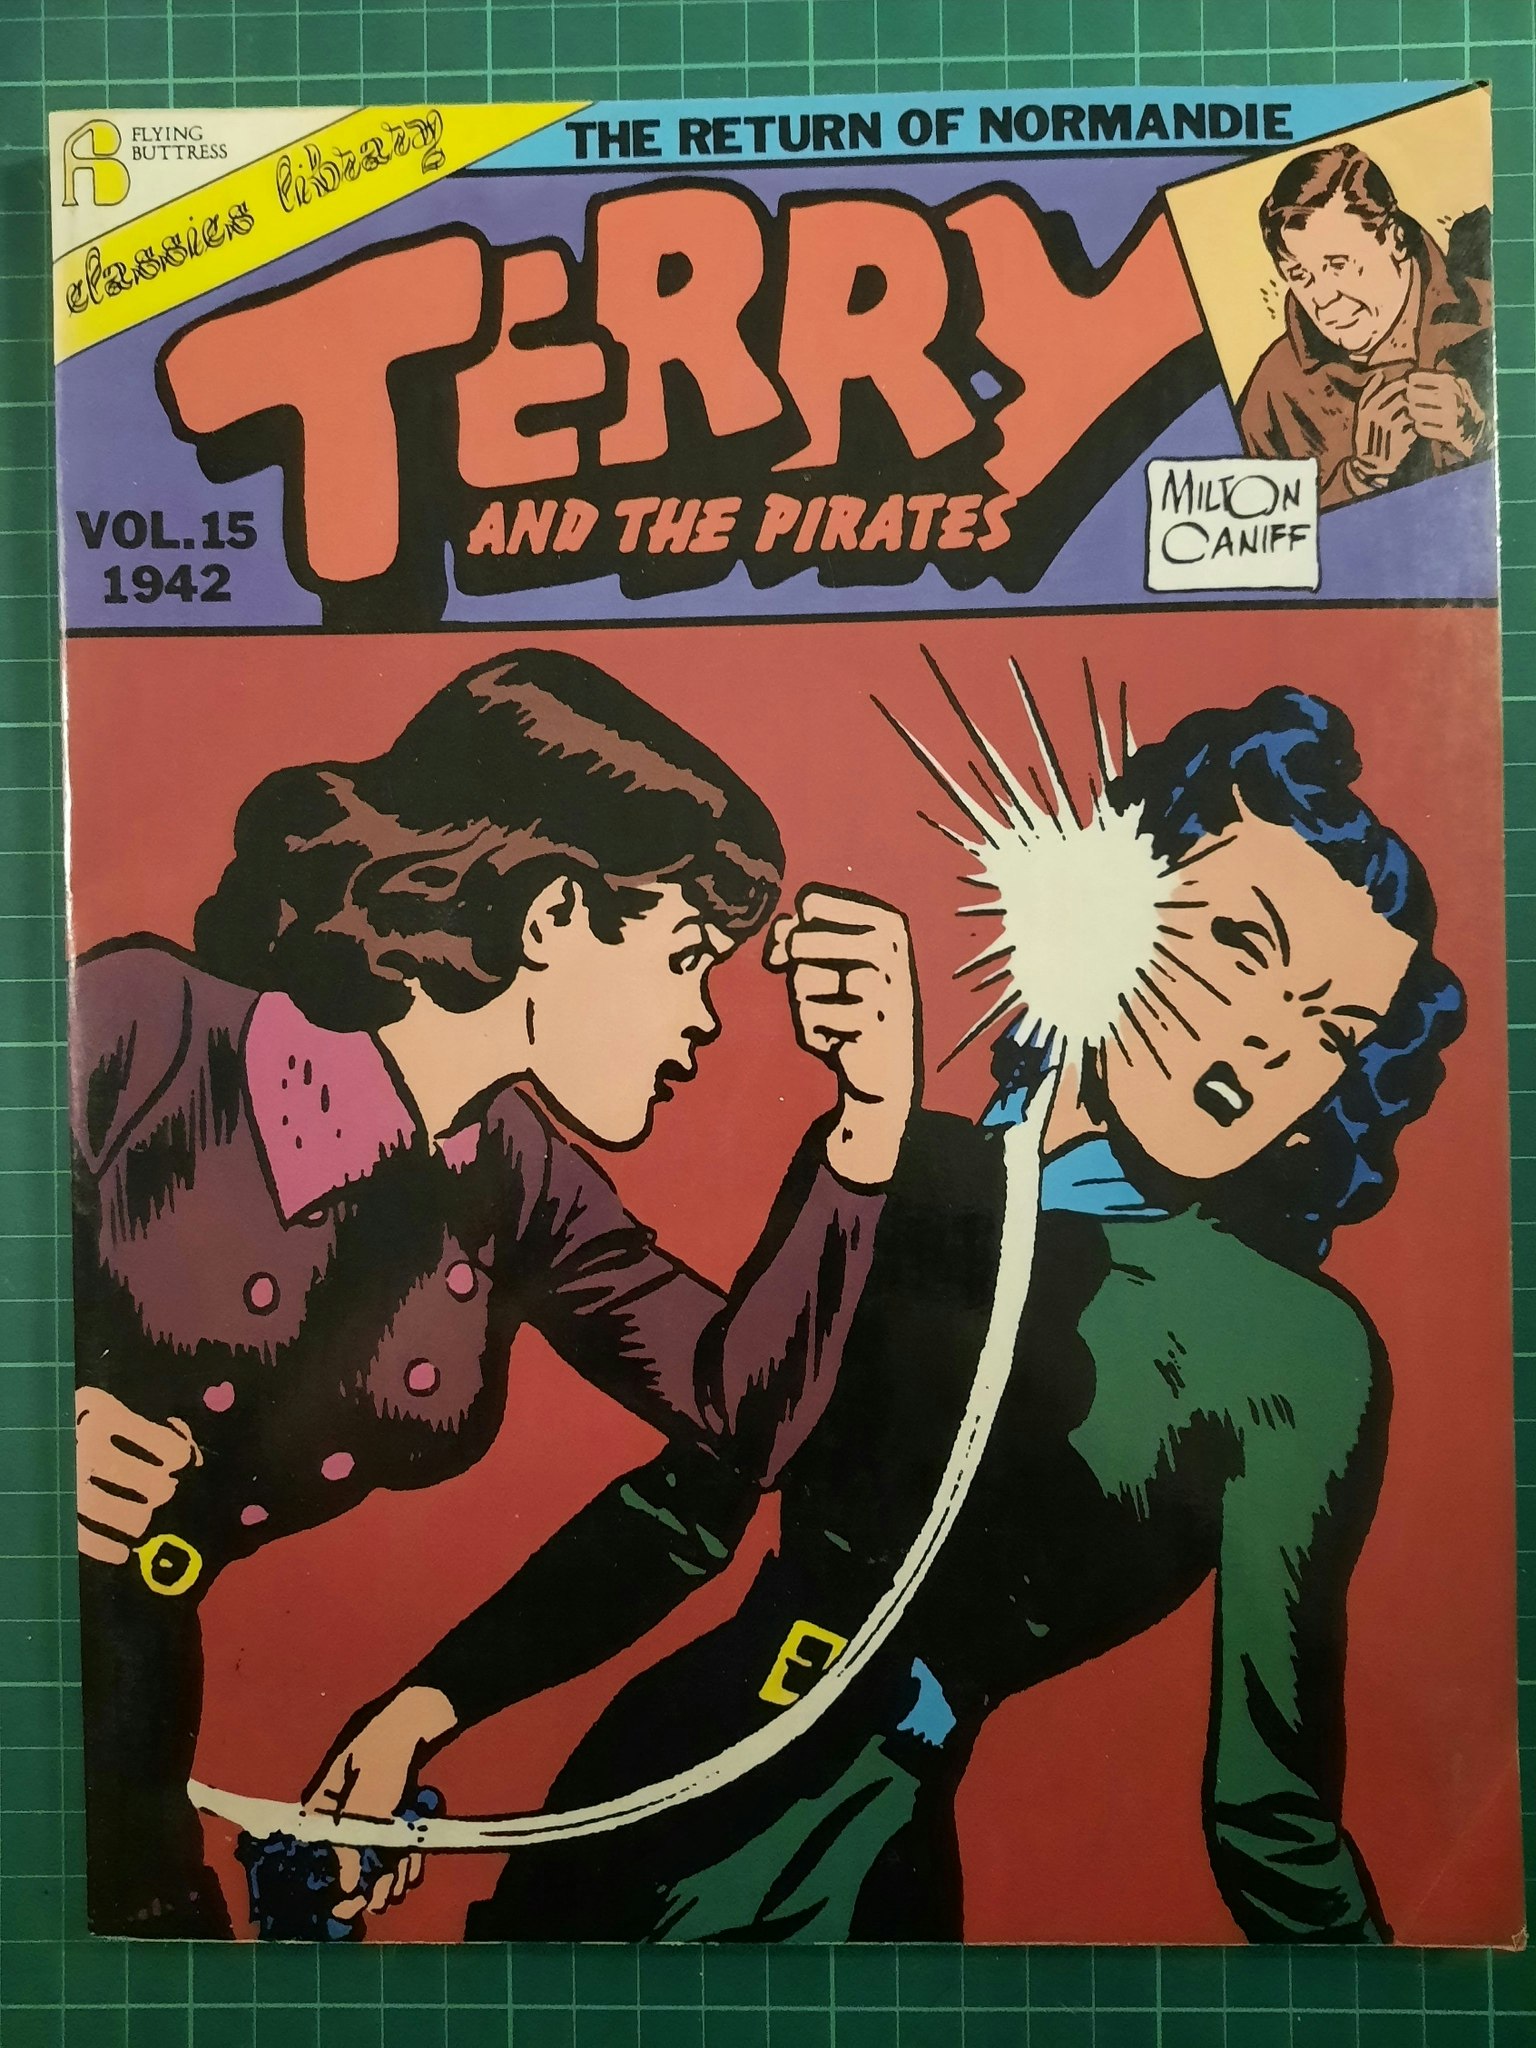 Terry and the pirates #15